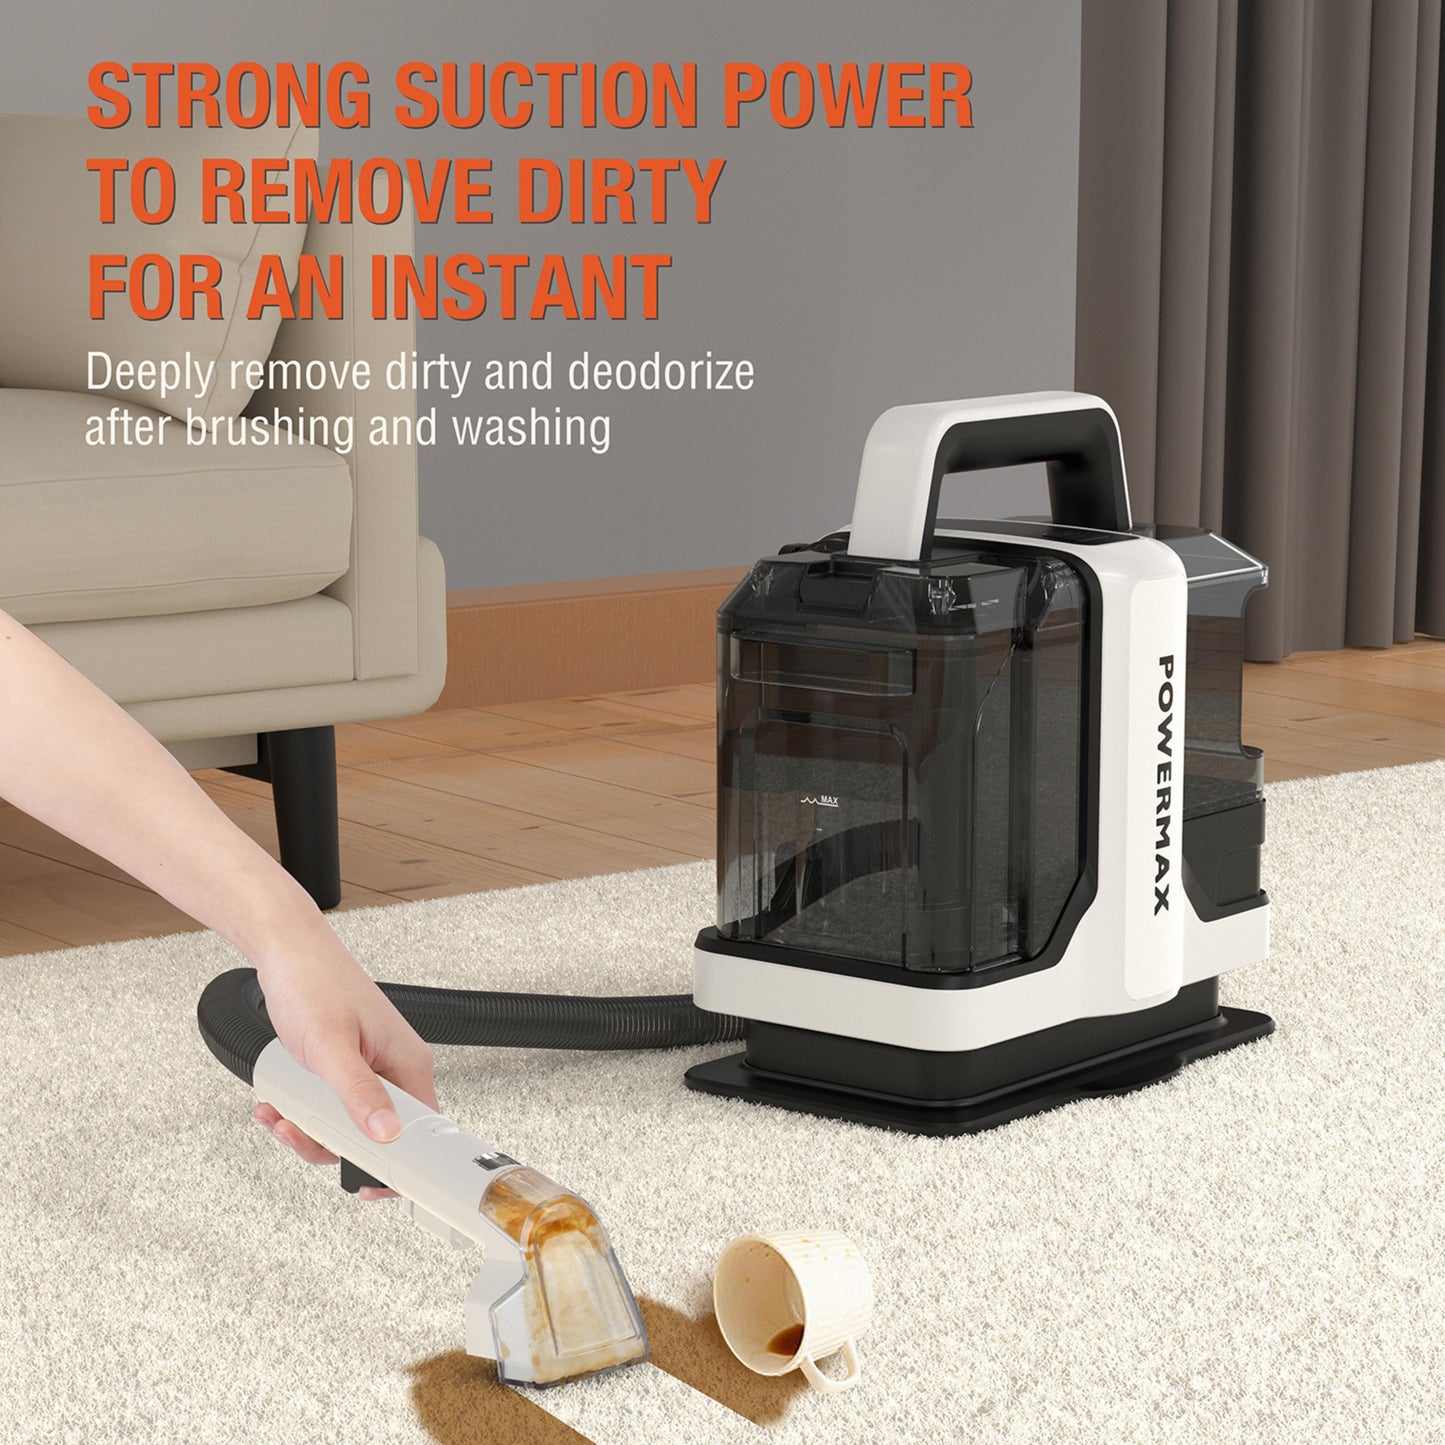 Paw-some Clean Pro Carpet Cleaner